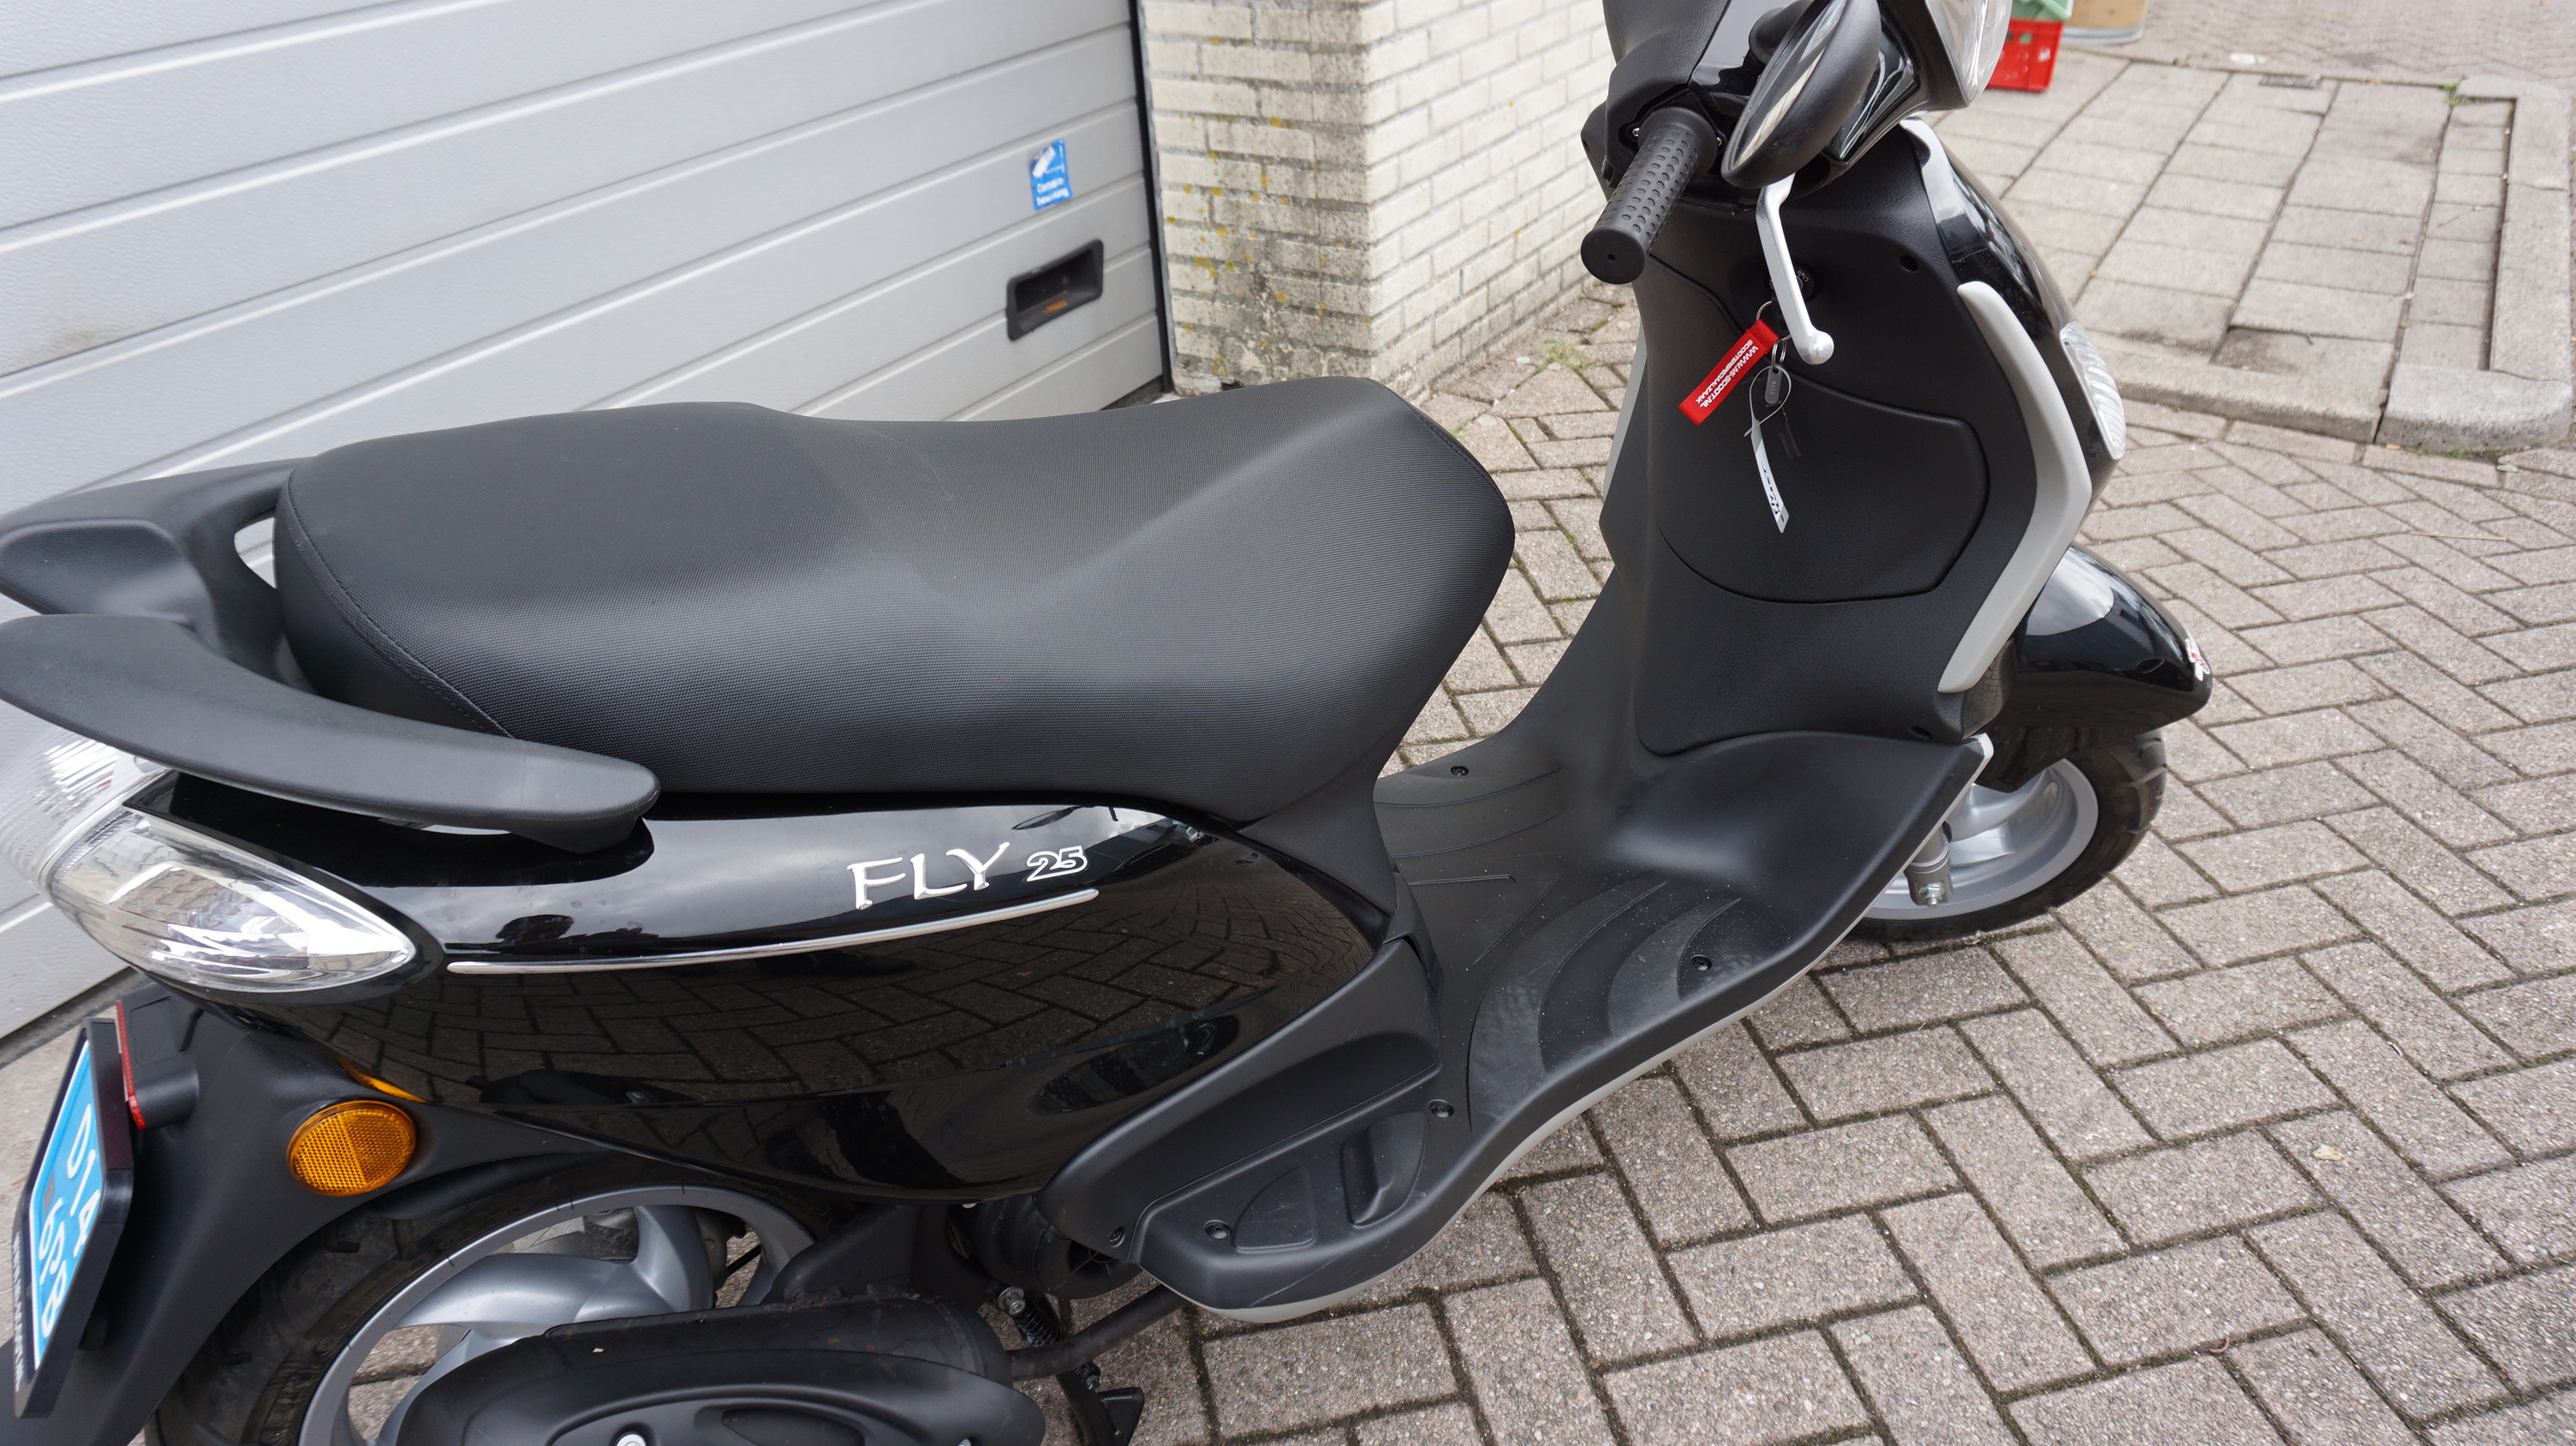 Piaggio Fly 4T Snorscooter